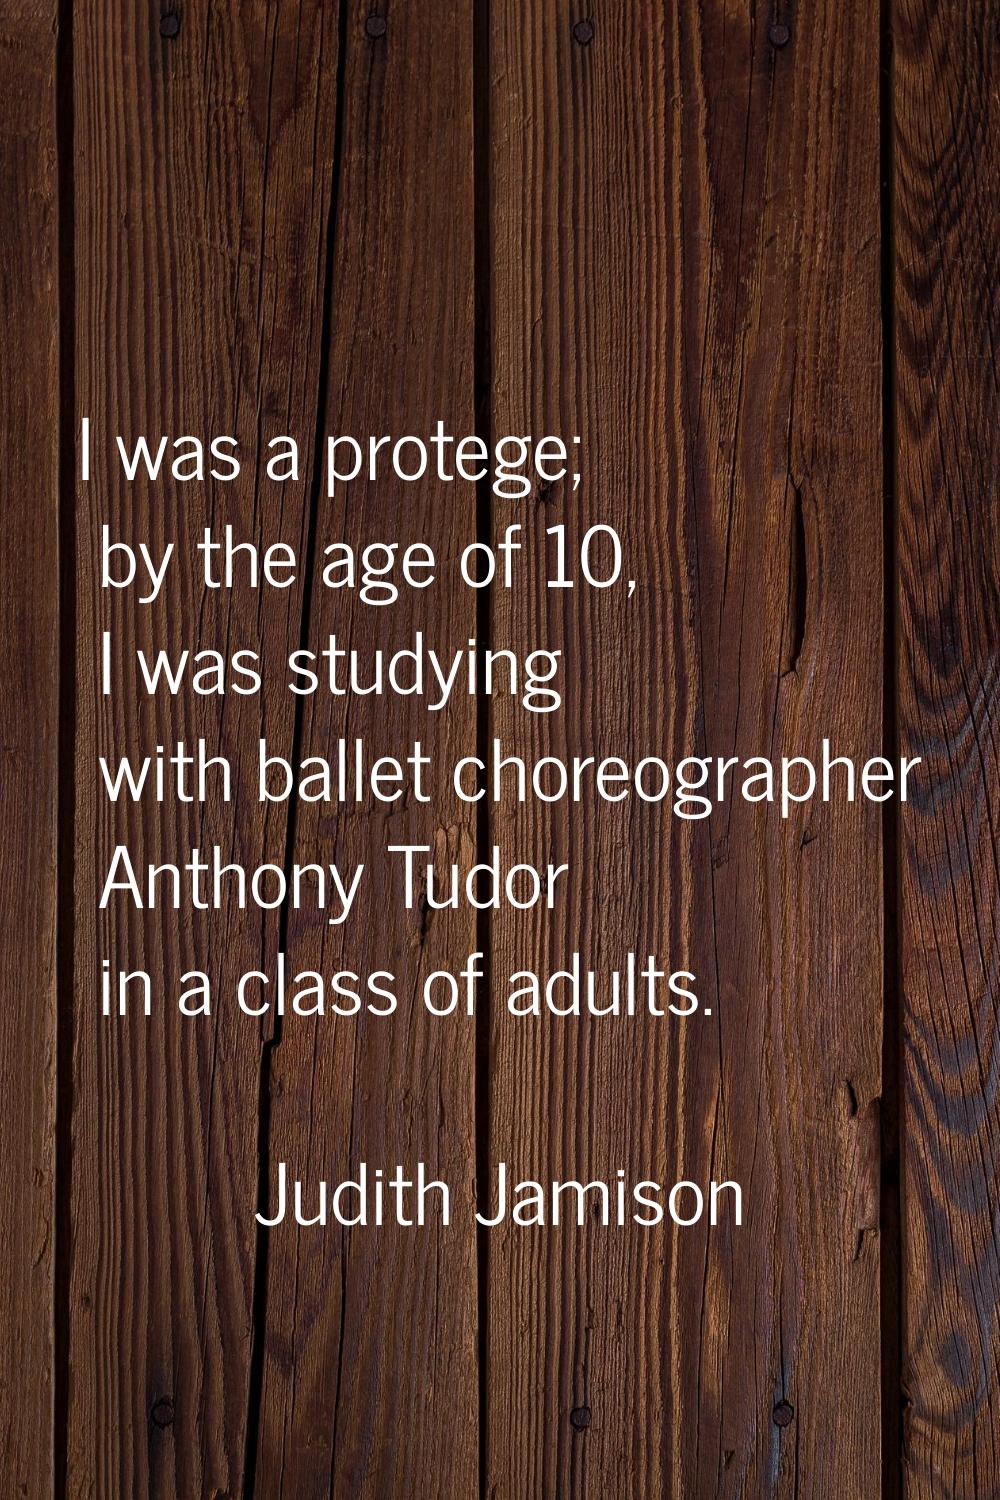 I was a protege; by the age of 10, I was studying with ballet choreographer Anthony Tudor in a clas